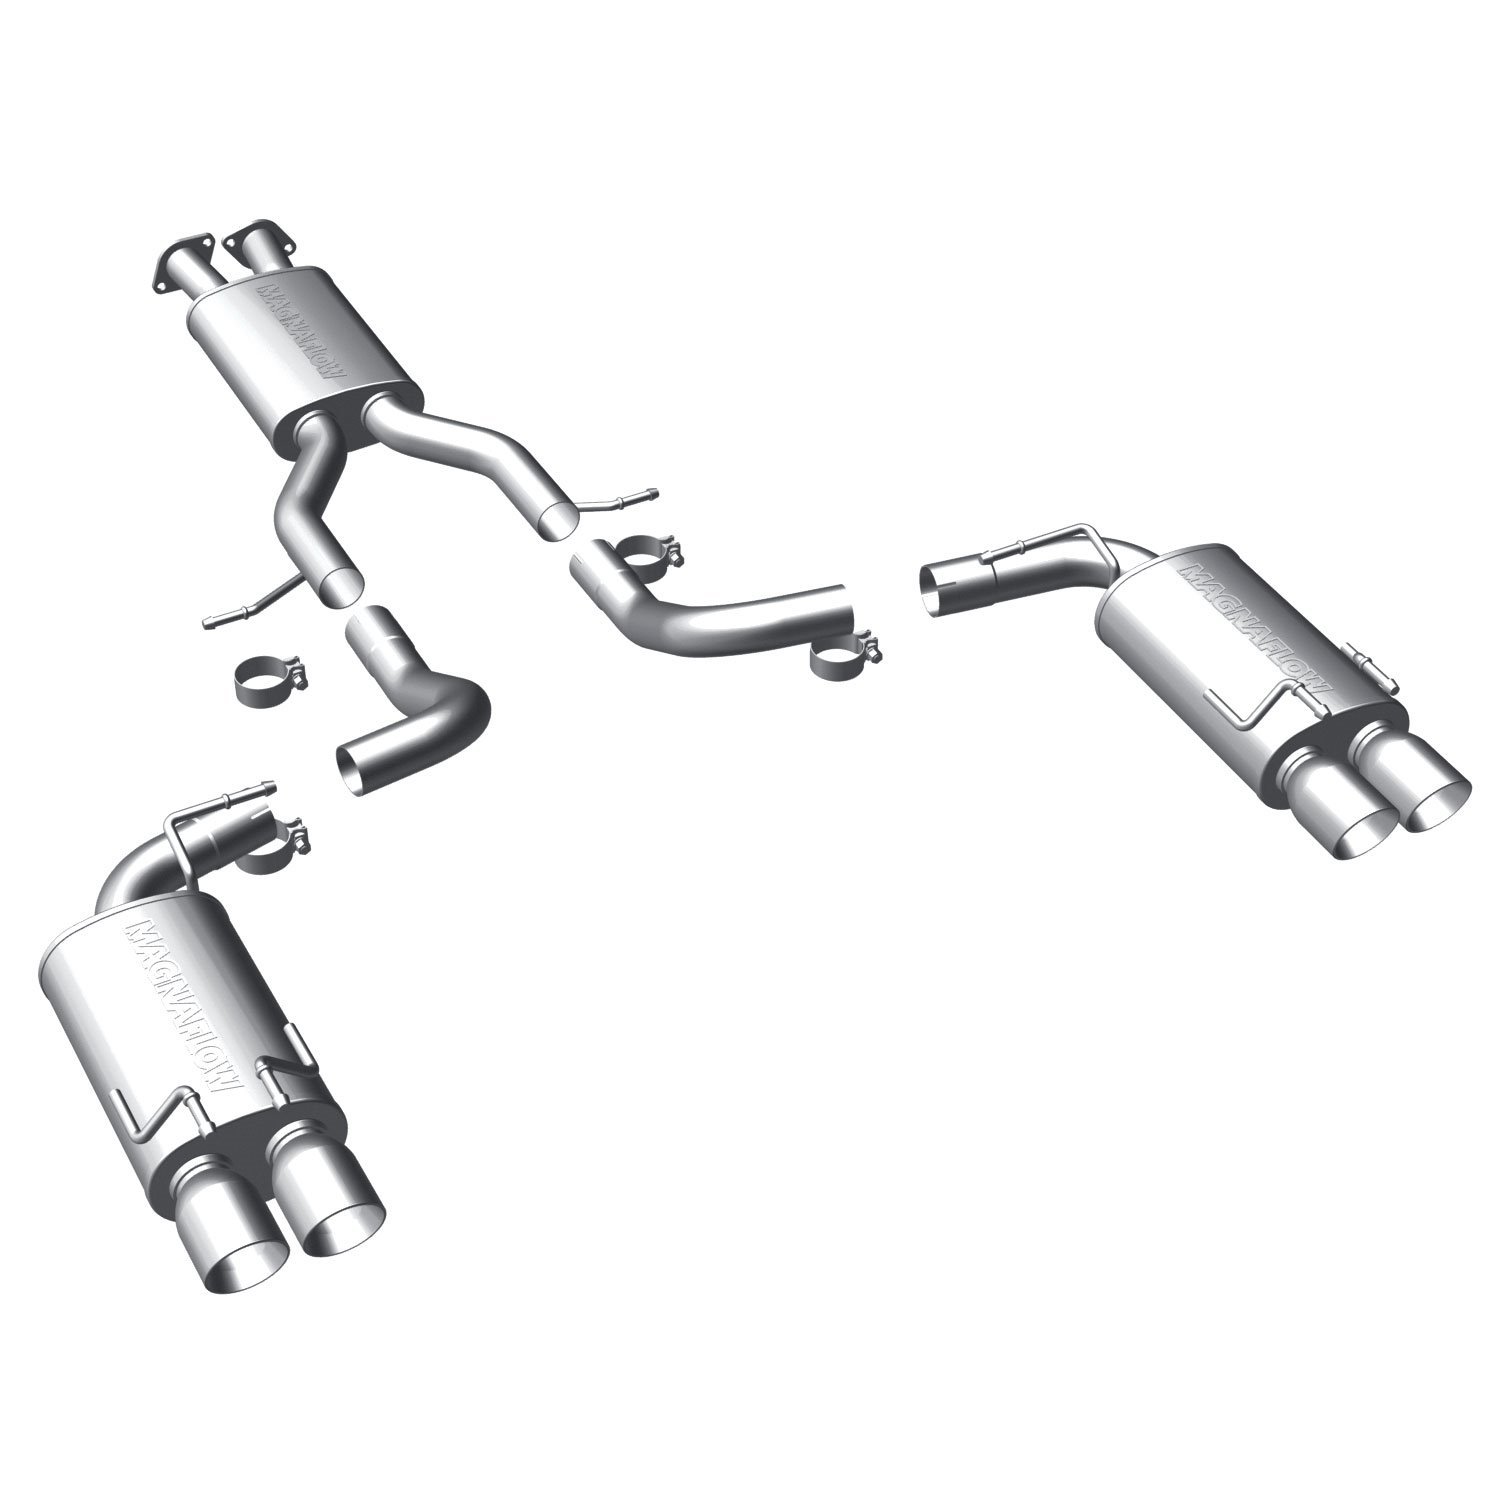 Street Series Cat-Back Exhaust System 1990-1995 for Nissan 300ZX 3.0L V6 (Exc. 2+2 & Turbo)